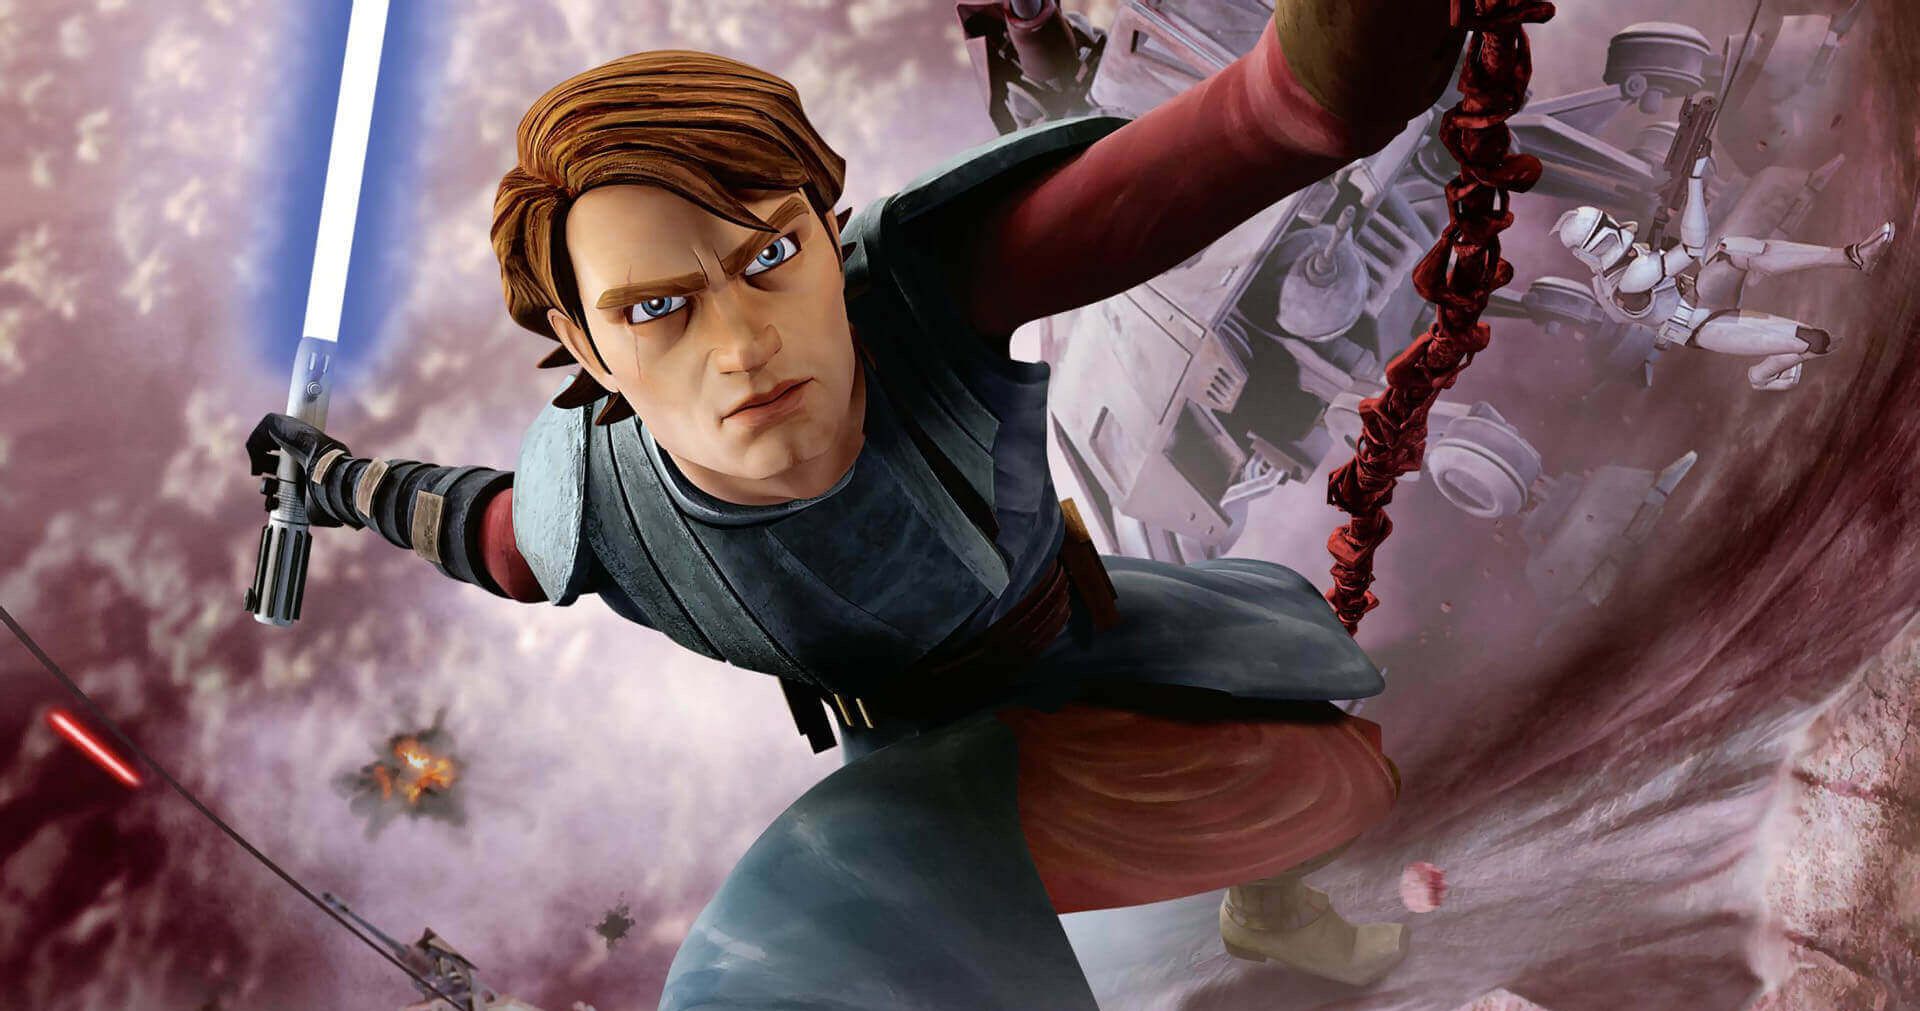 Anakin Skywalker Will Return in New Star Wars Animated Project